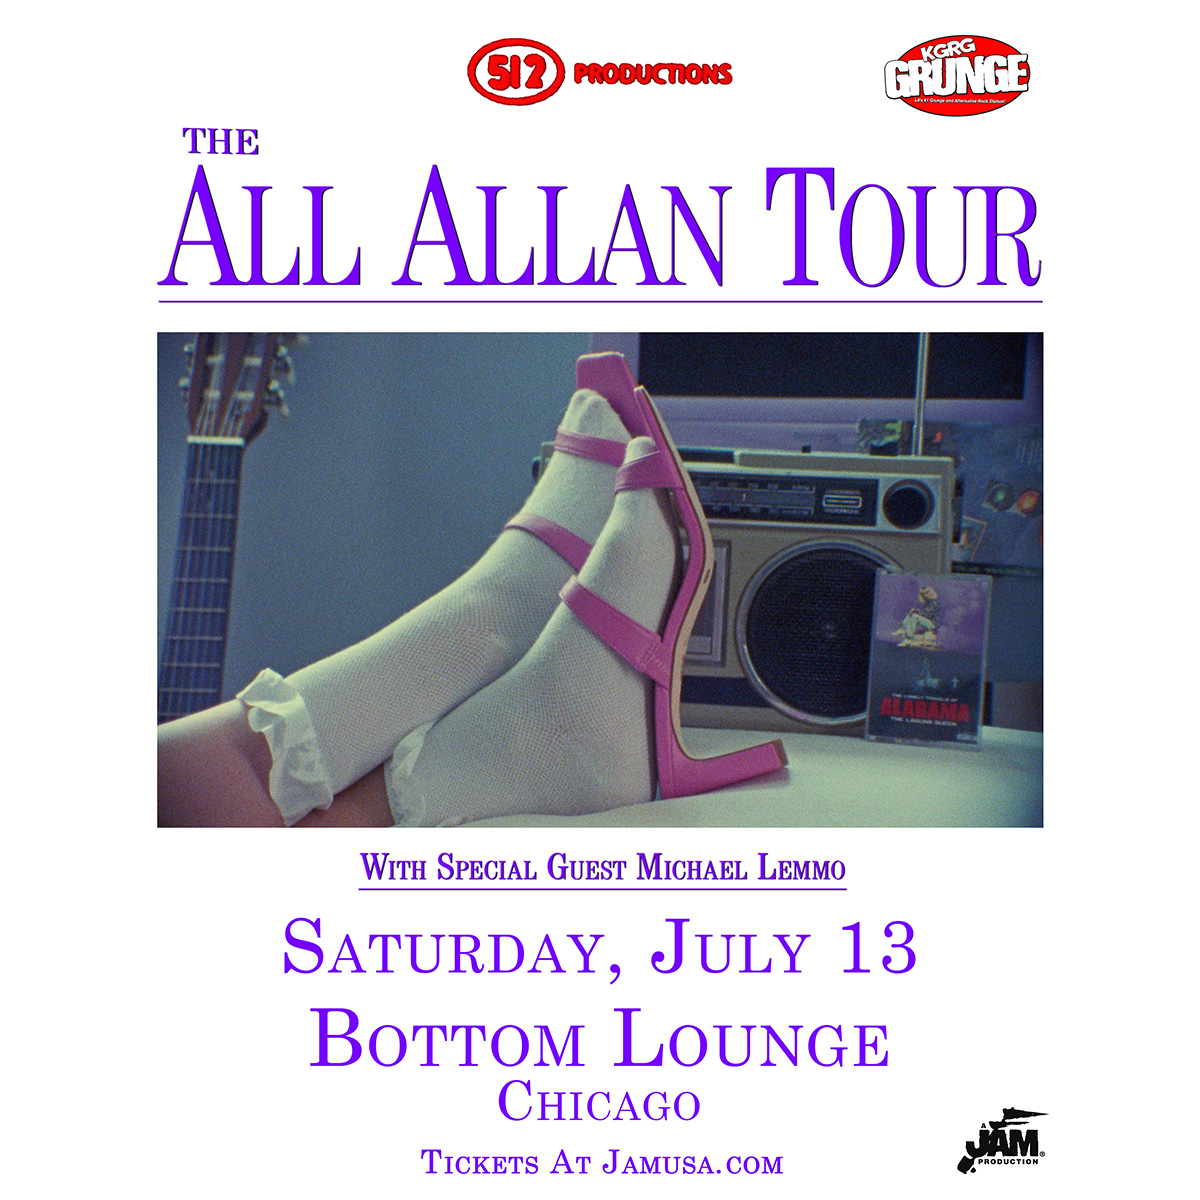 Just Announced: Fresh off the release of his highly anticipated 'Chapter Two,' @allanrayman returns to Chicago for the All Allan Tour on Saturday, July 13 at Bottom Lounge! Get tickets this Friday at 9am: bit.ly/allanrayman-07…